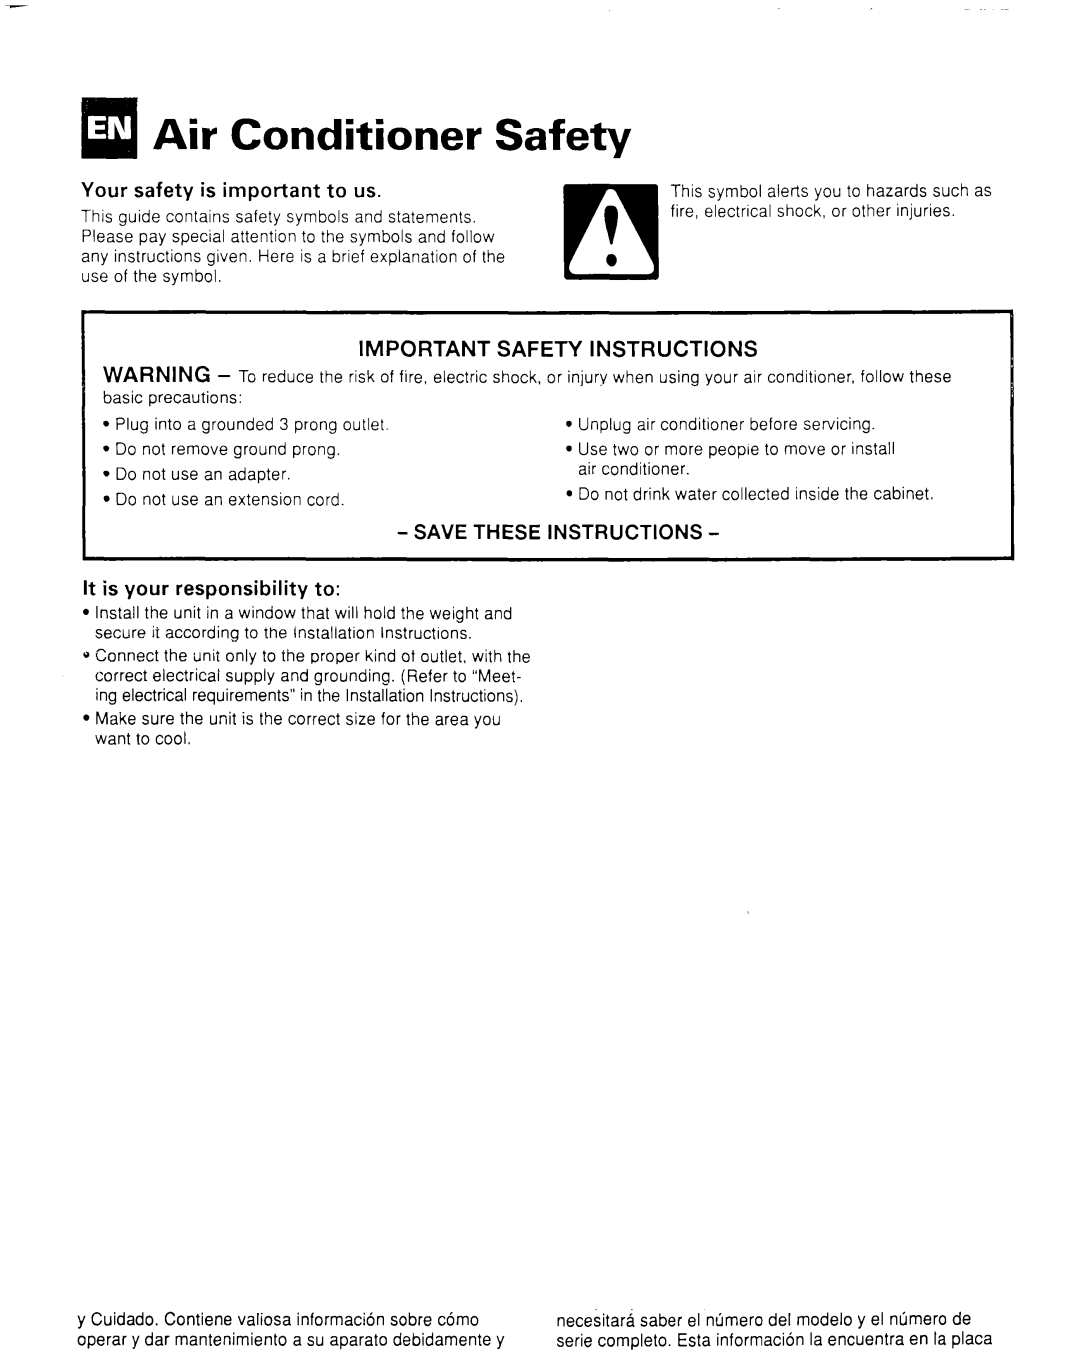 Whirlpool CA8WR42 manual ErrAir Conditioner Safety, Your safety is important to us, It is your responsibility to 